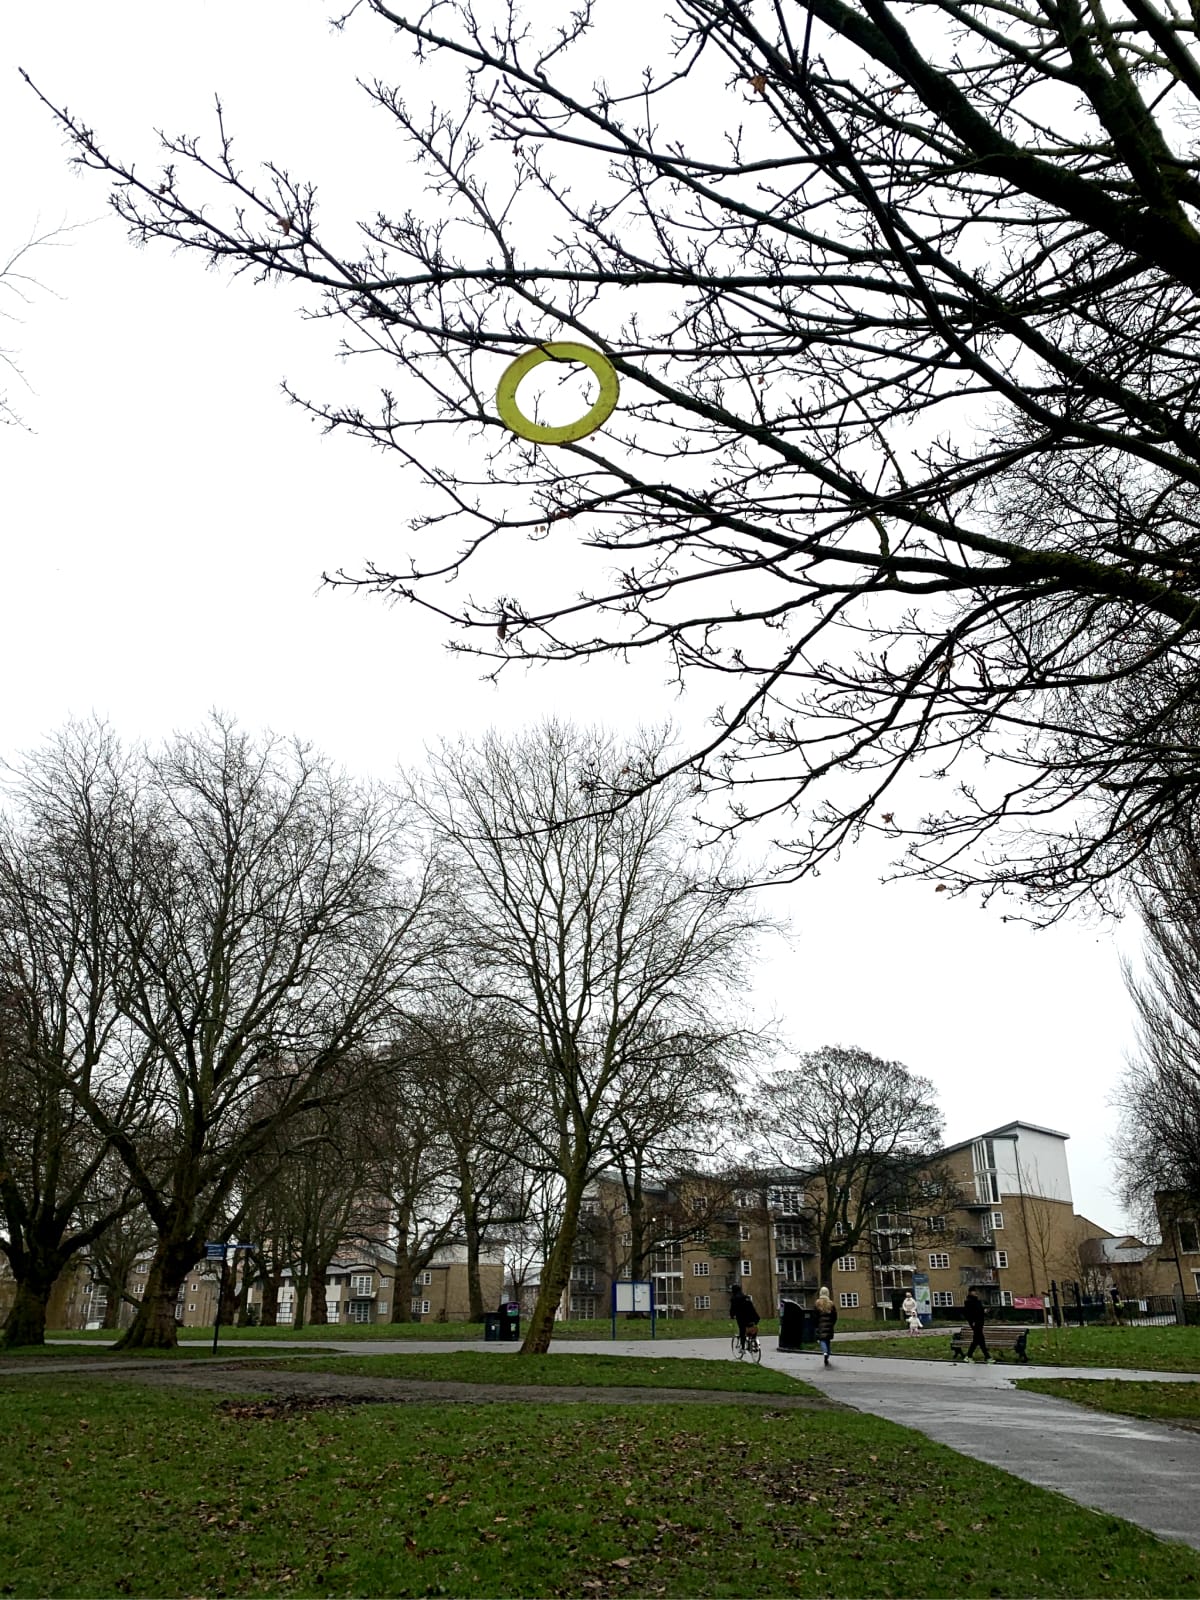 Yellow disc hanging off a high tree branch in a park as walkers and cyclists pass. The weather is grey and wet.